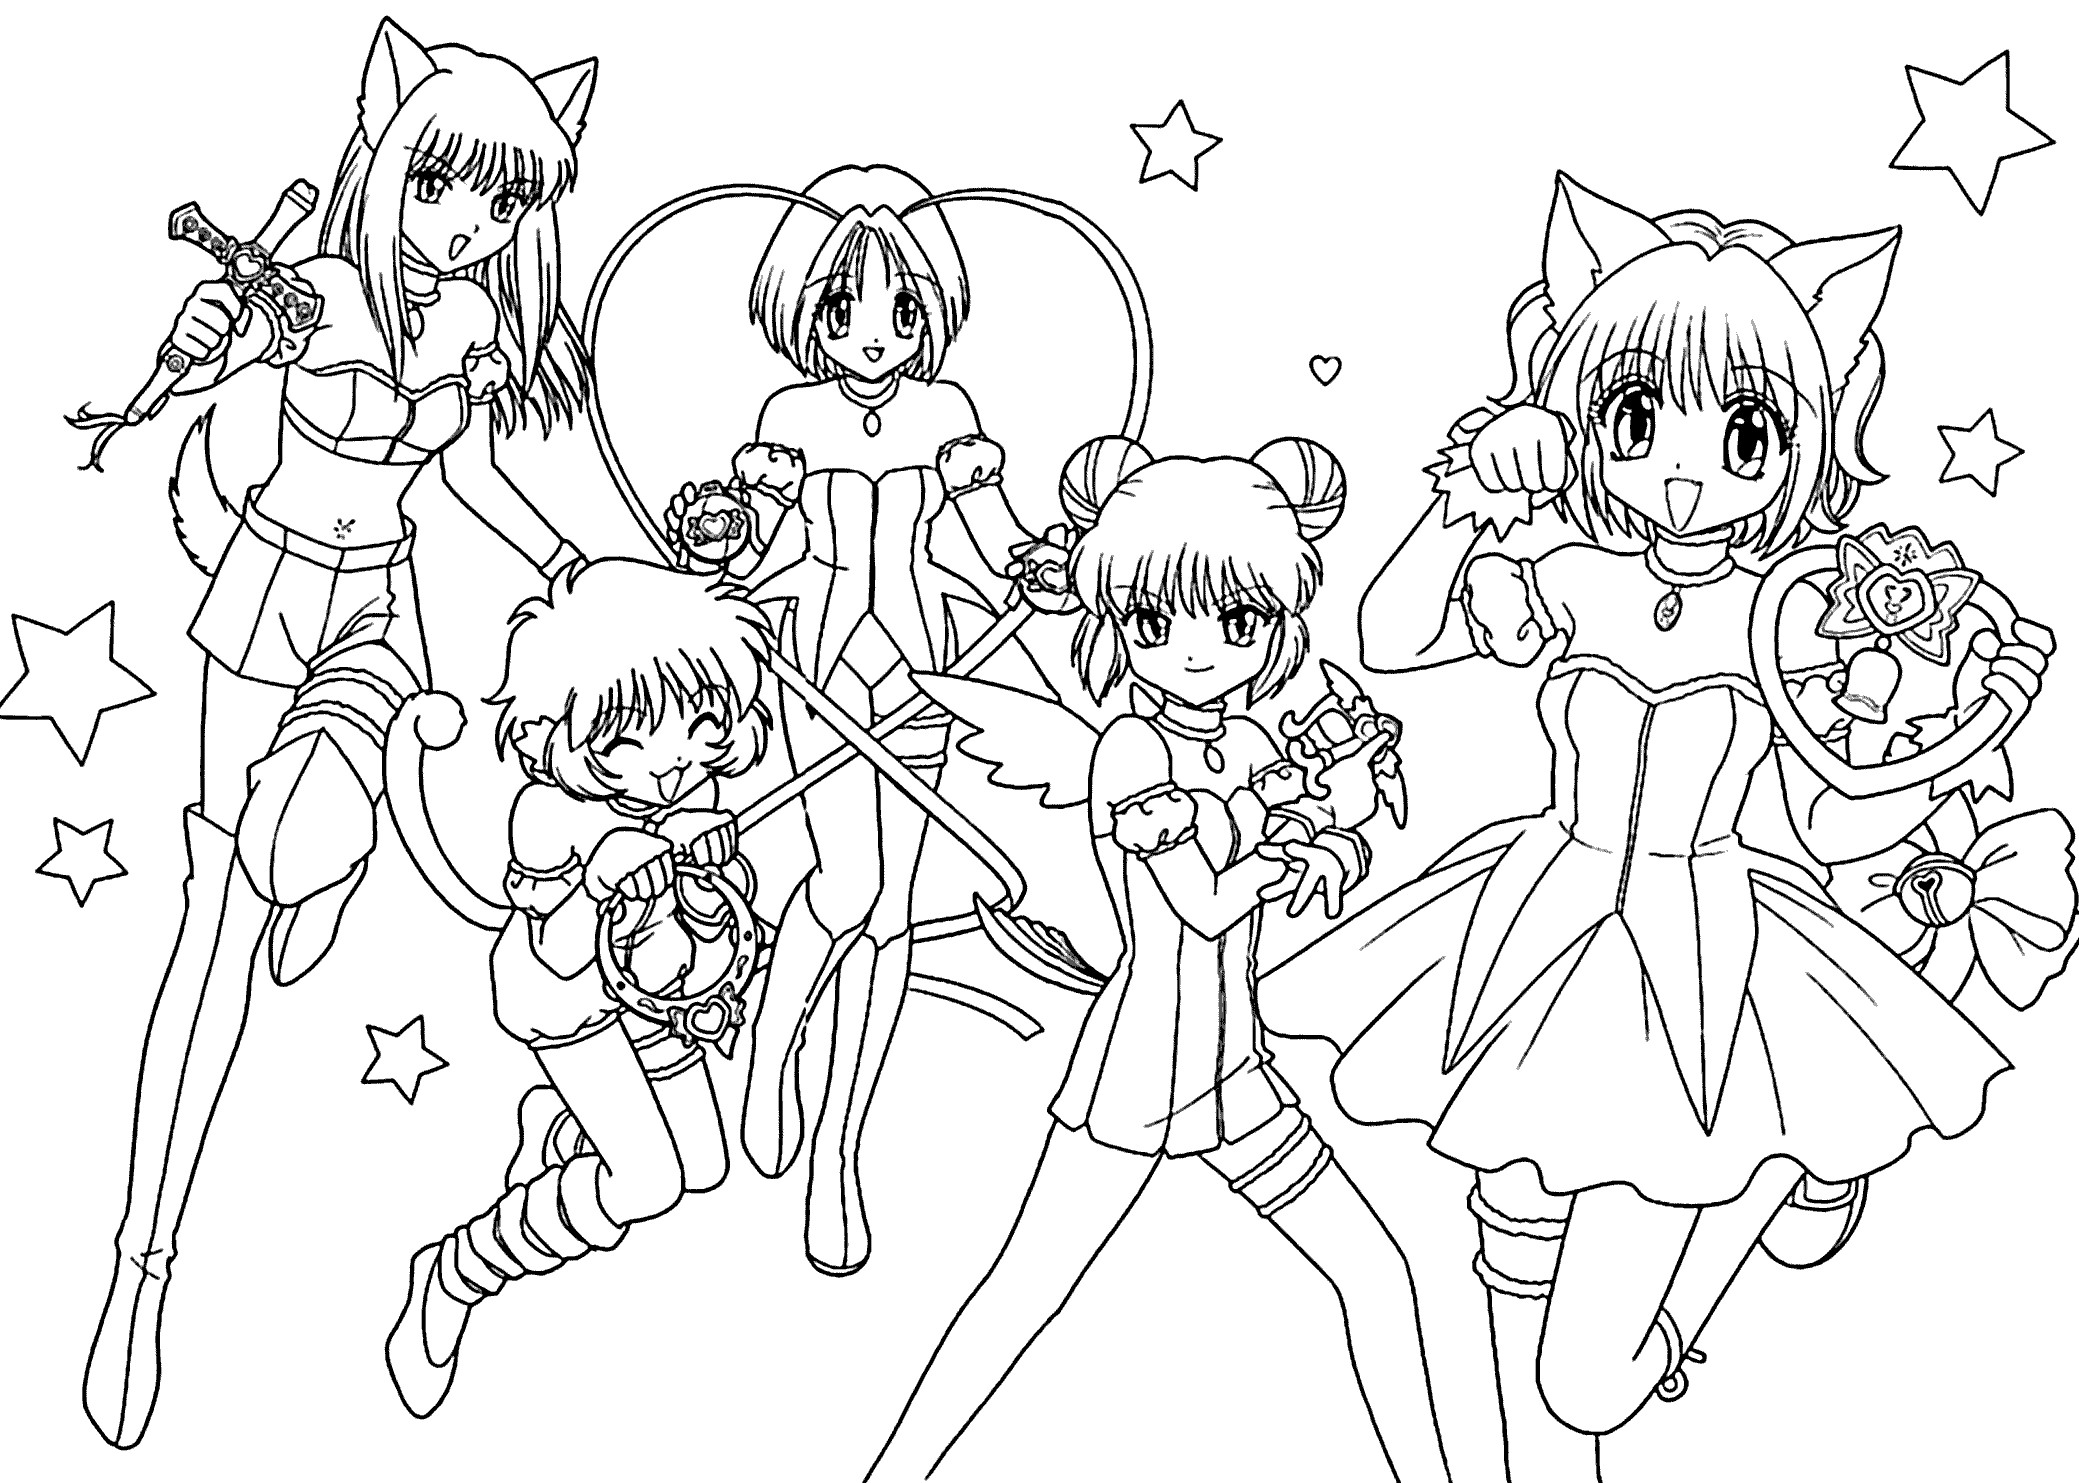 Manga Coloring Pages For Kids
 Mew mew team anime coloring pages for kids printable free